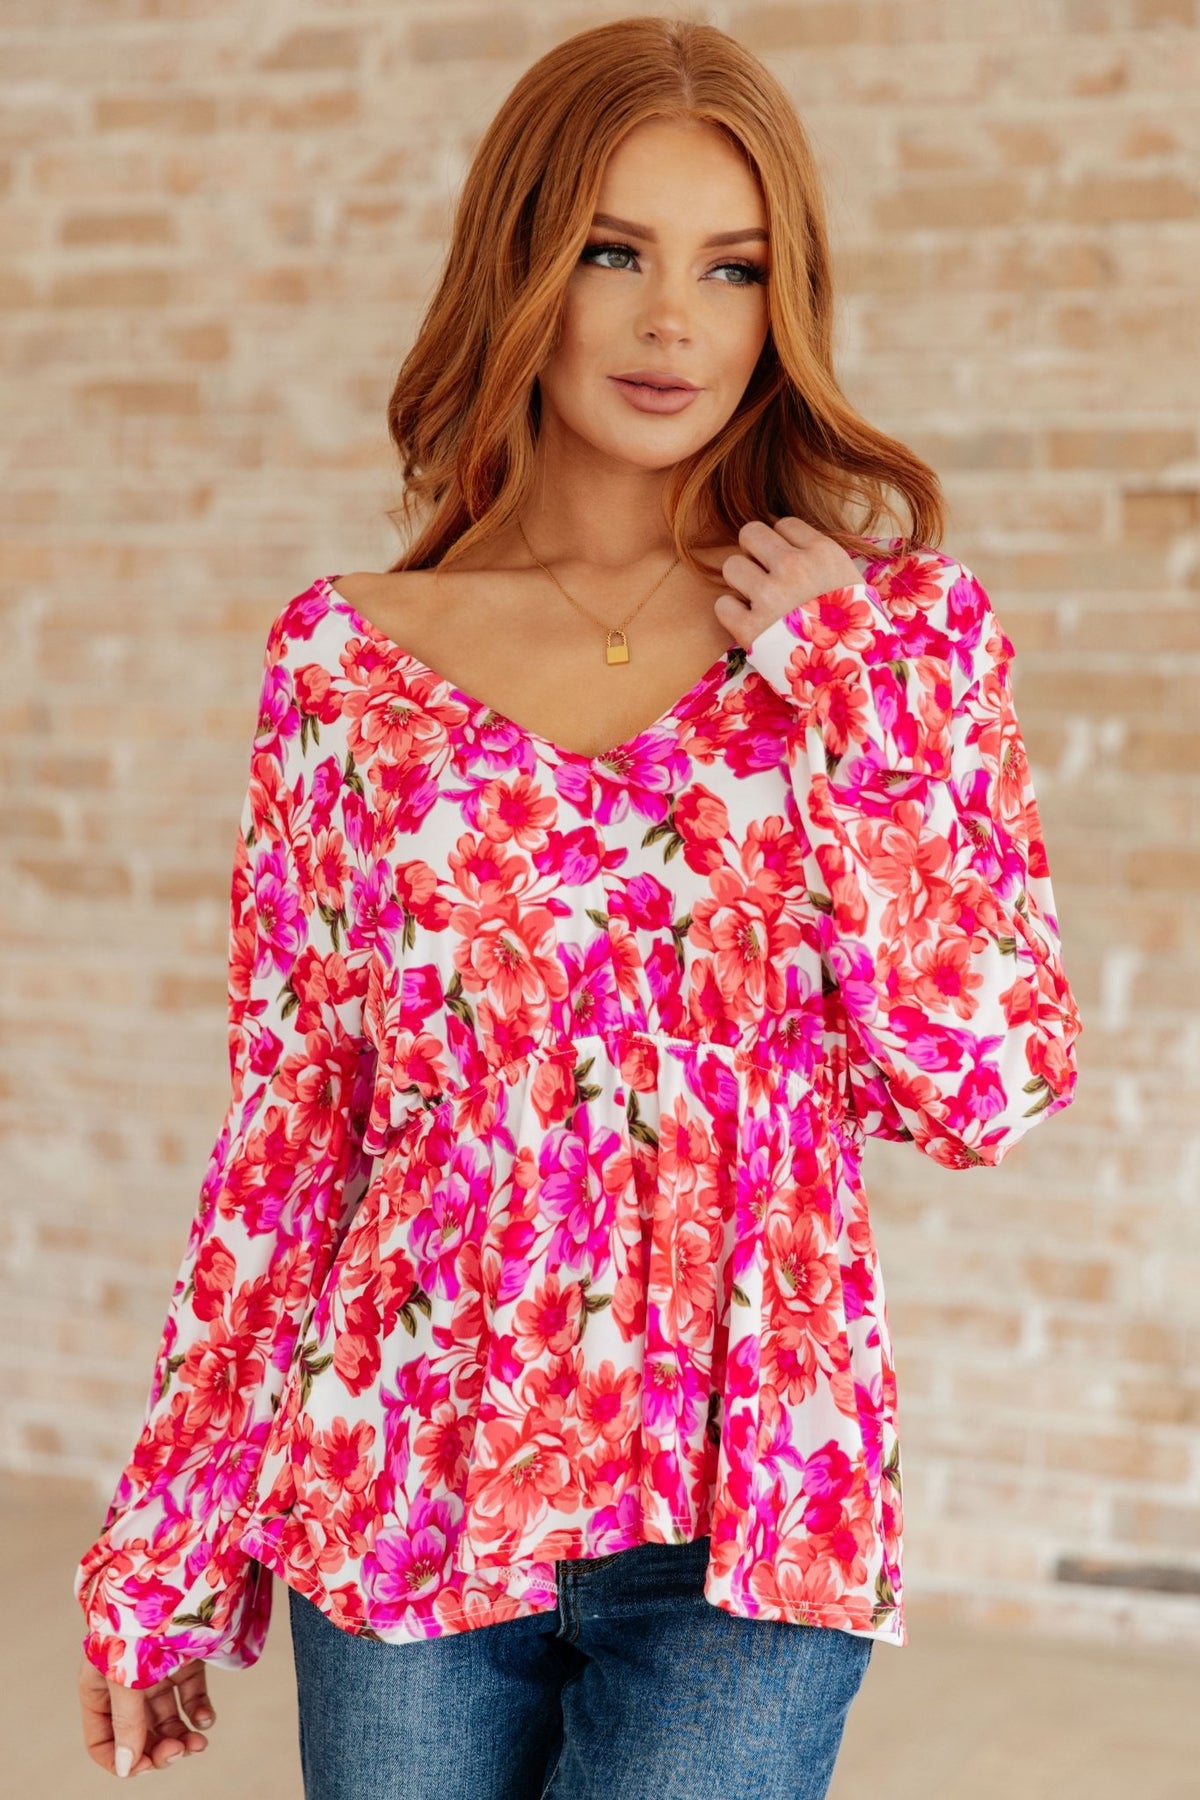 Smile Like You Mean It Floral Peplum - Happily Ever Atchison Shop Co.